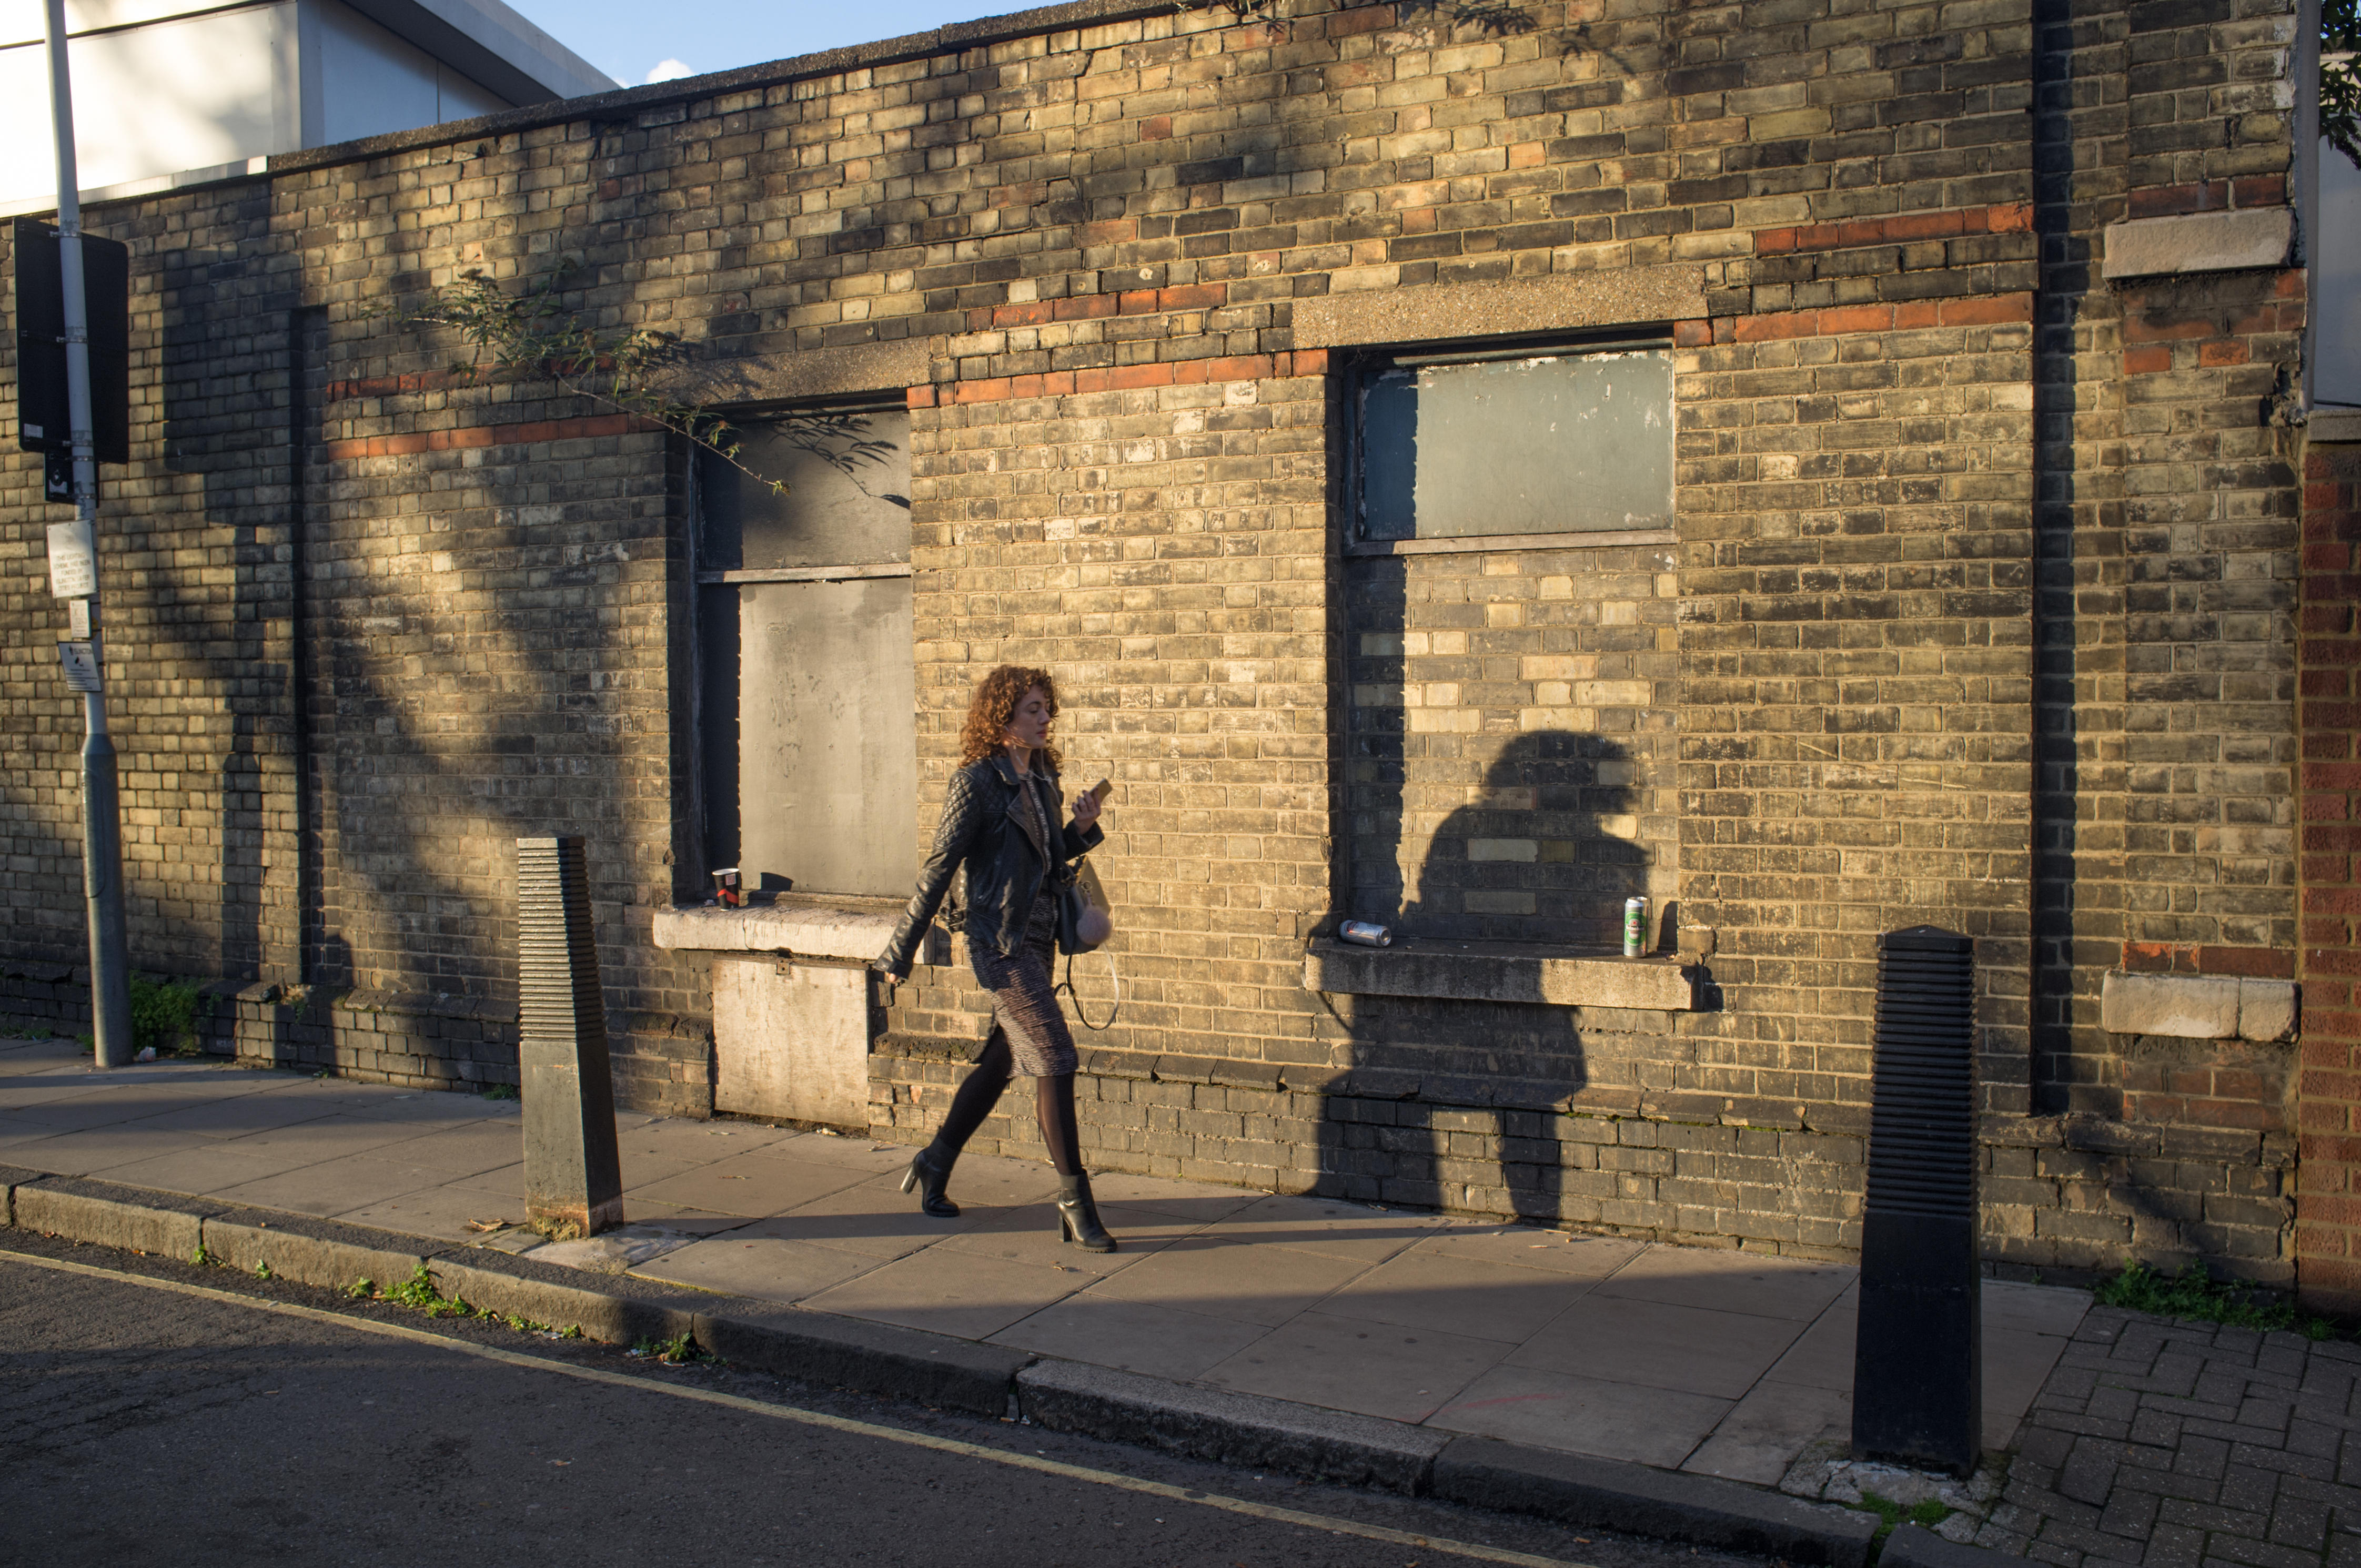 A woman walking home on an autumn evening in Islington, North London